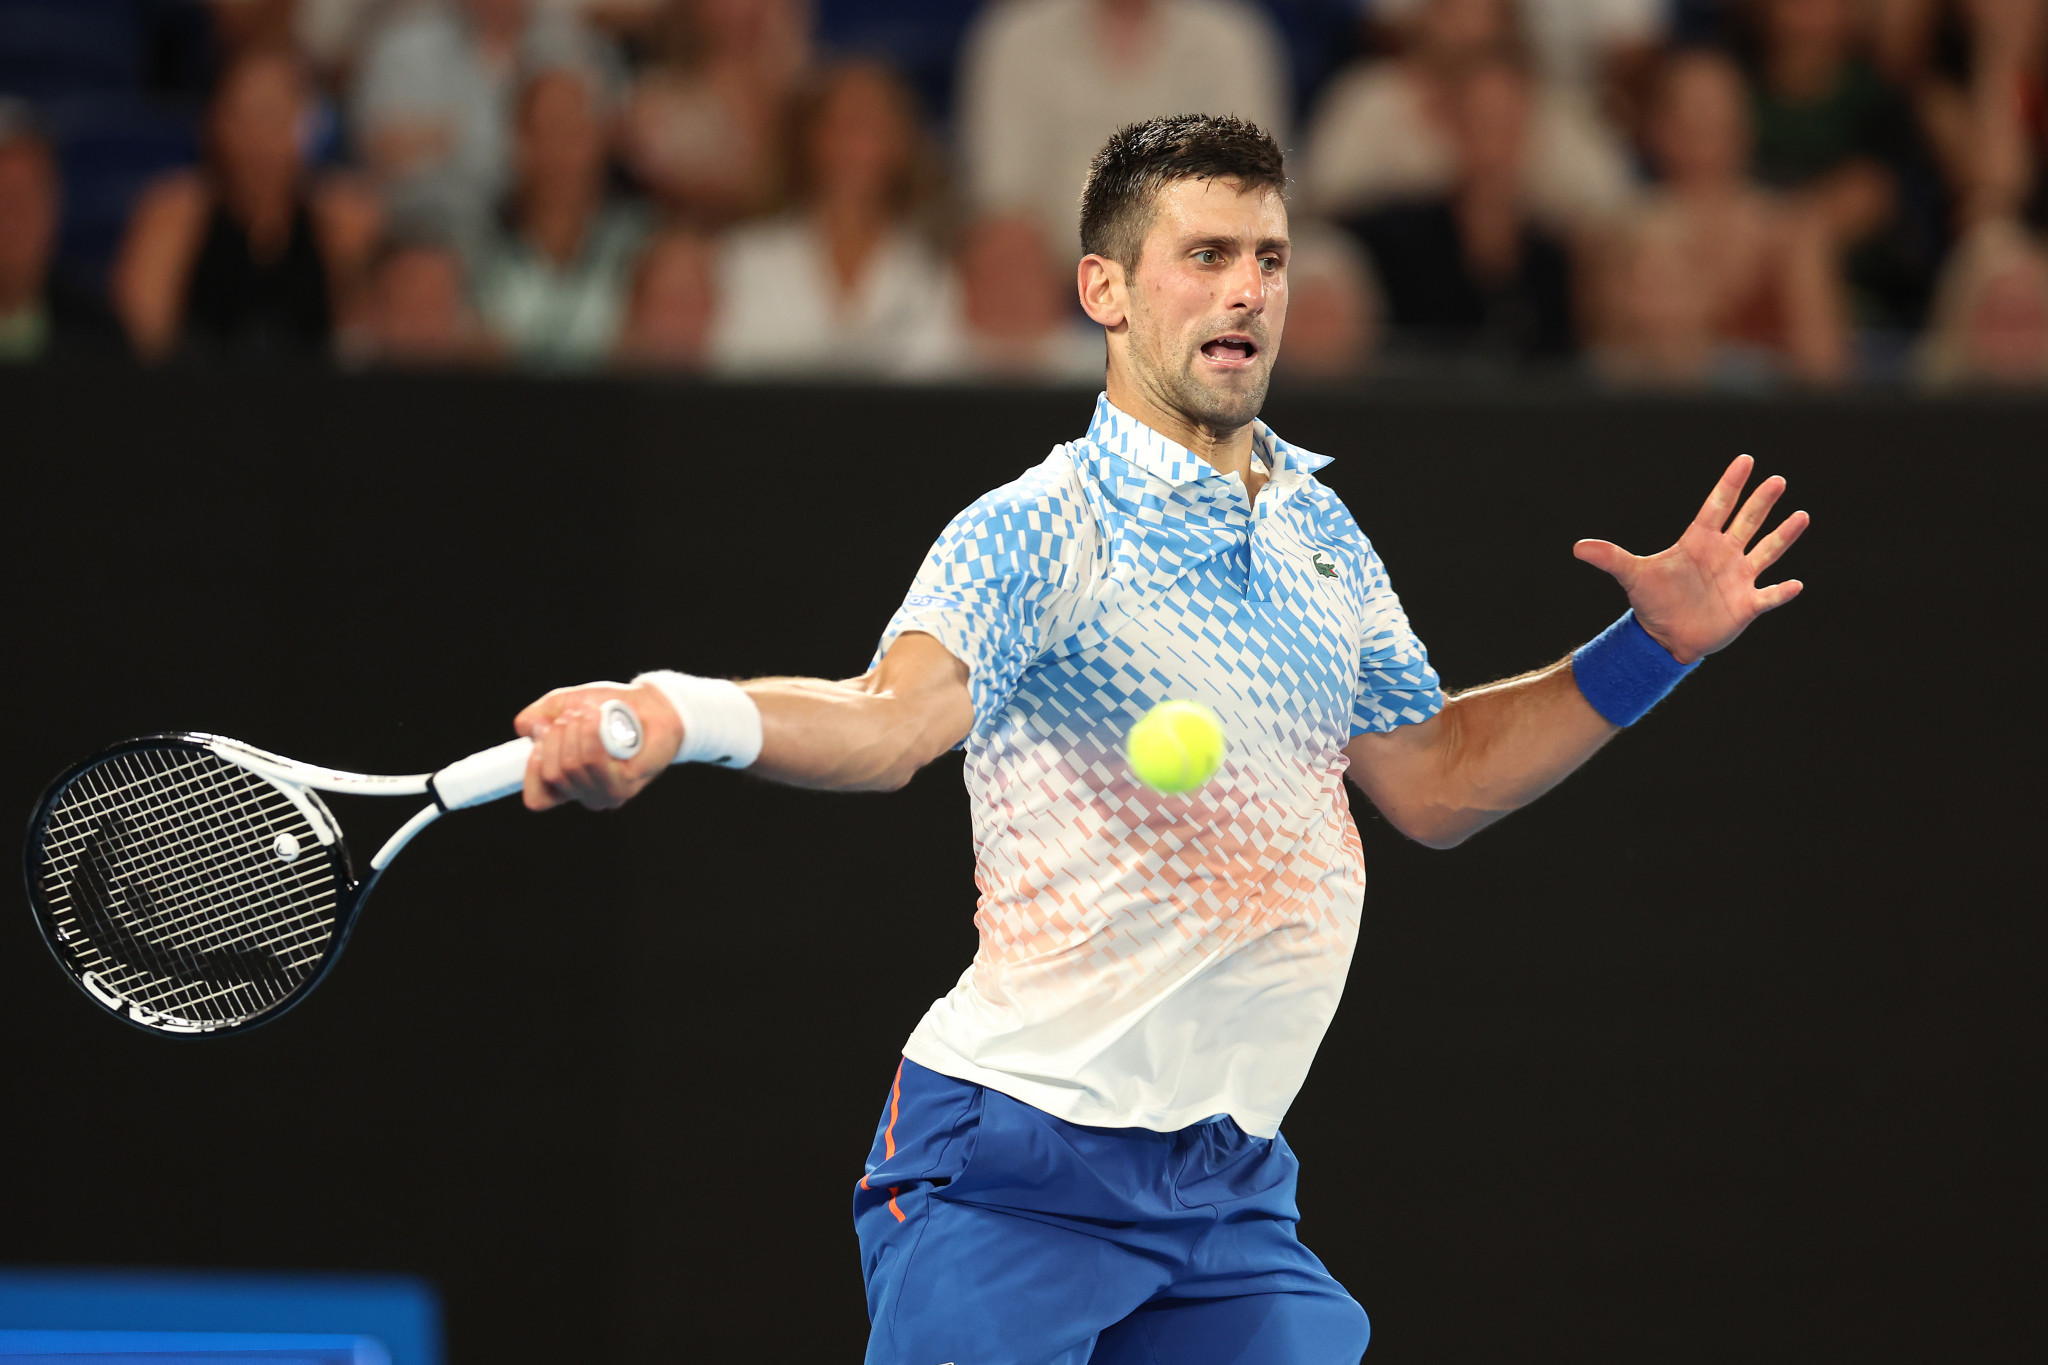 Djokovic to miss Indian Wells after failure to secure COVID-19 vaccine waiver to enter US